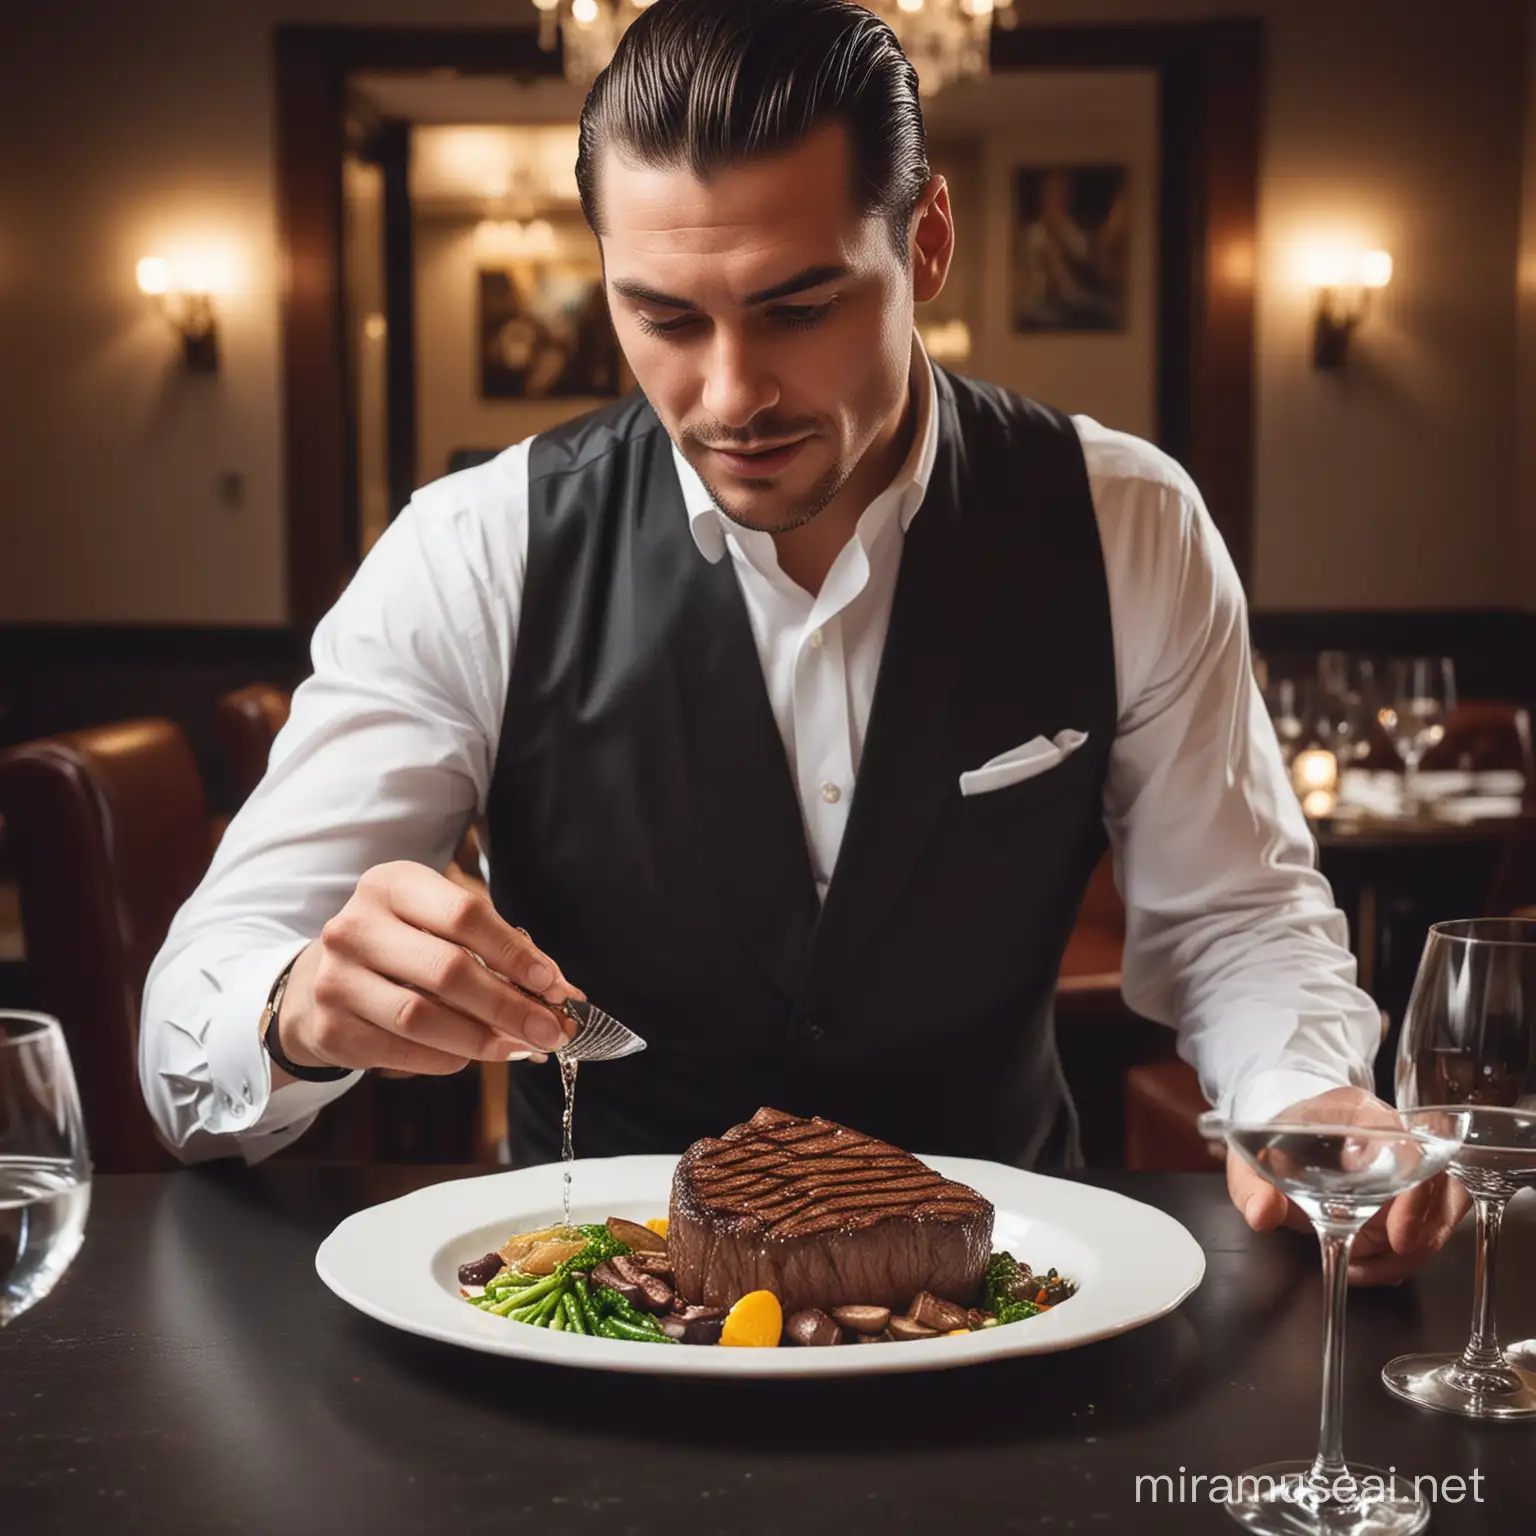 A well dressed man with slicked back hair eating a steak dinner at a fancy restaurant, the man is pouring a whole glass of water onto his steak